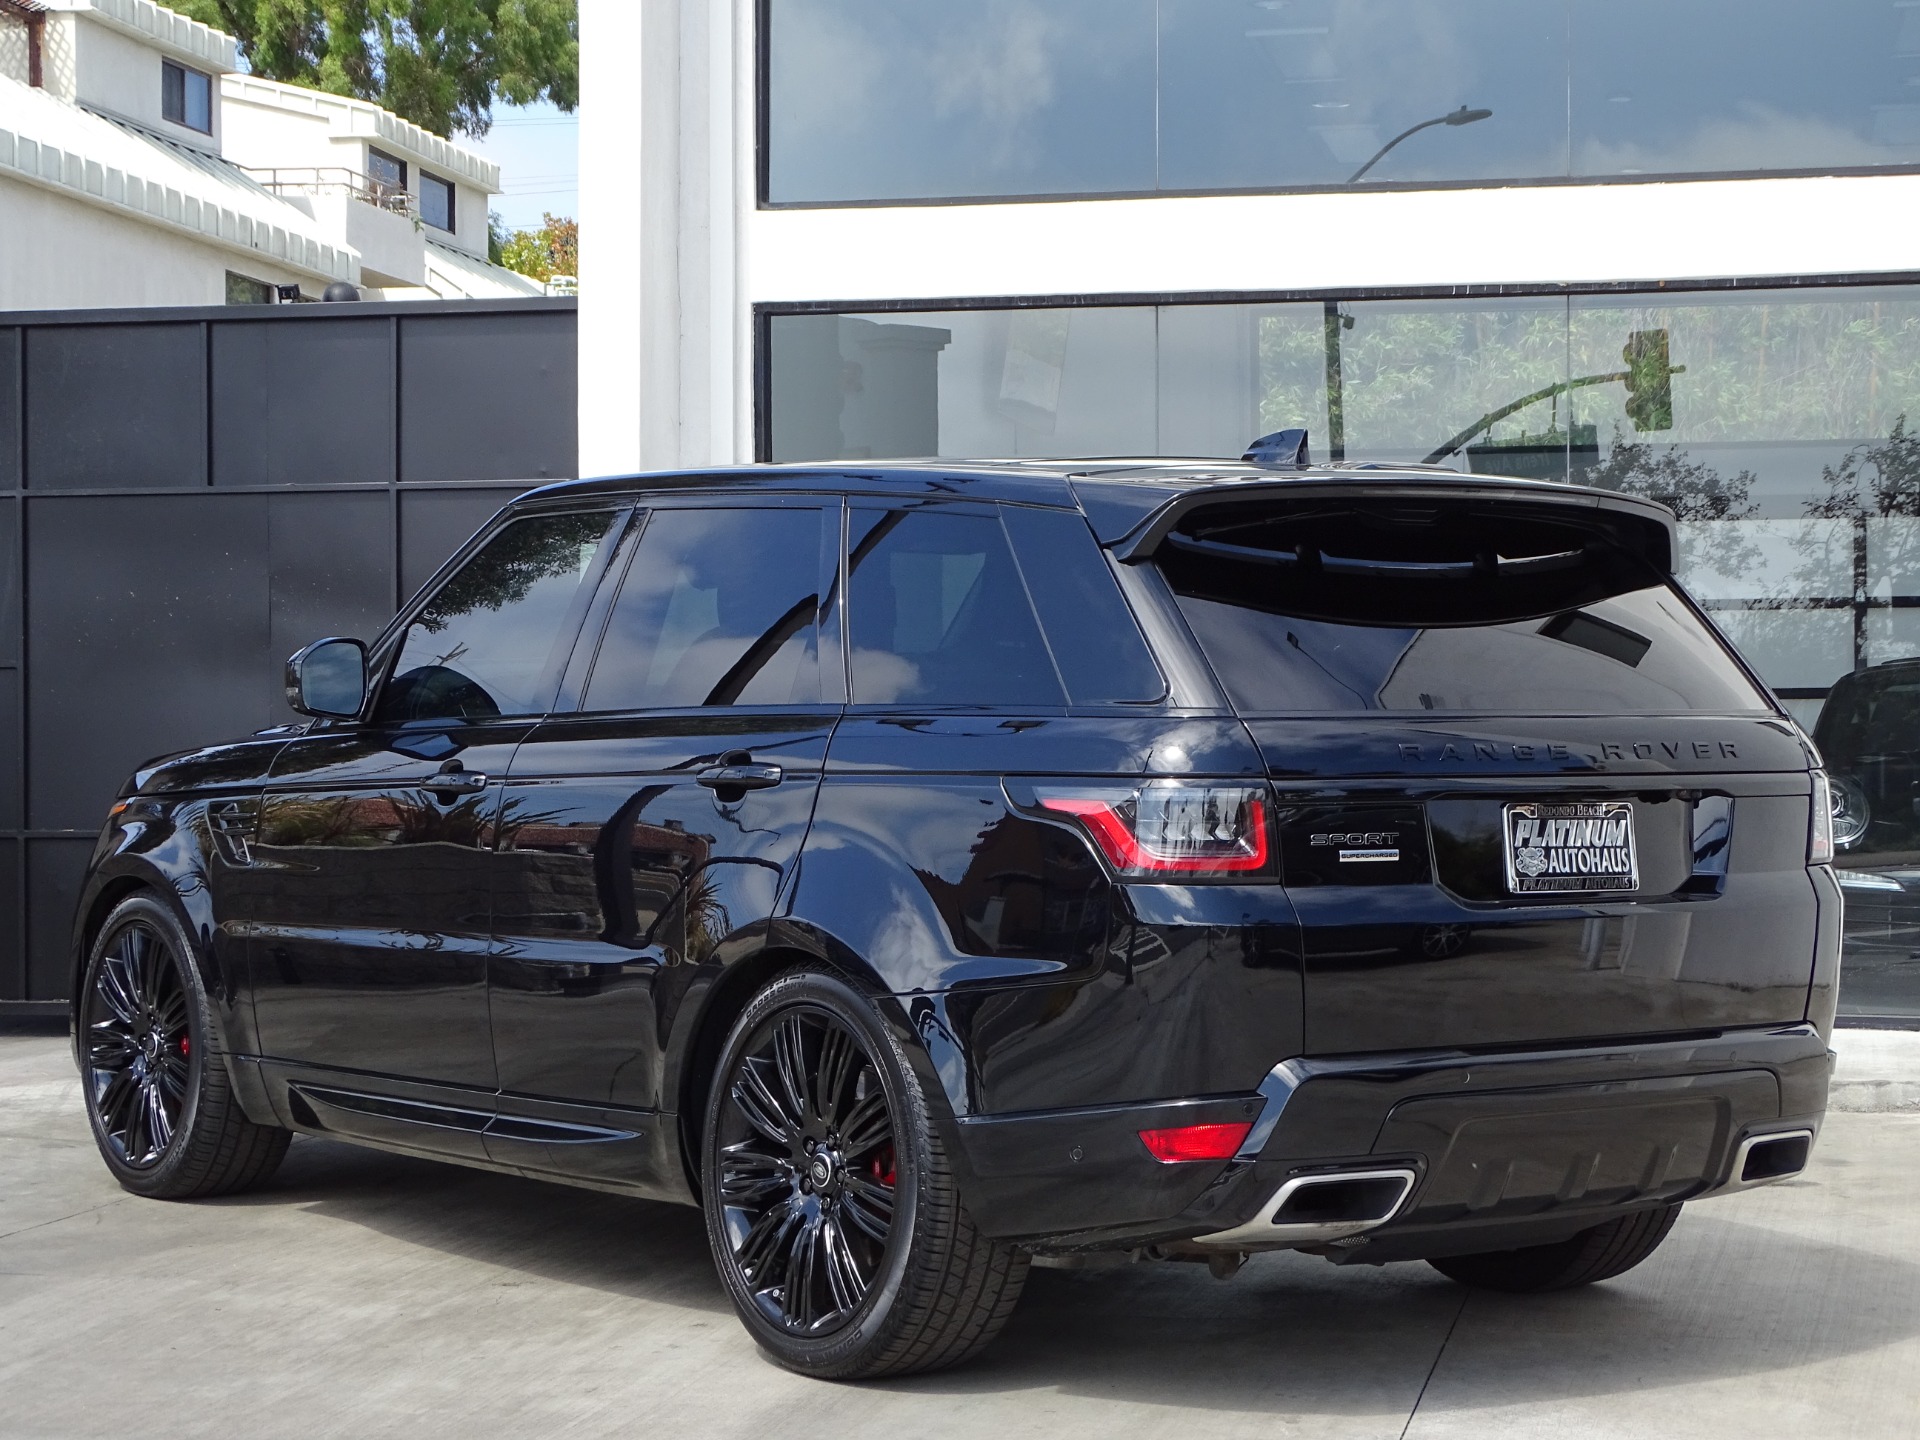 2019 Land Rover Range Rover Sport Supercharged Dynamic Stock # 6823B for  sale near Redondo Beach, CA | CA Land Rover Dealer